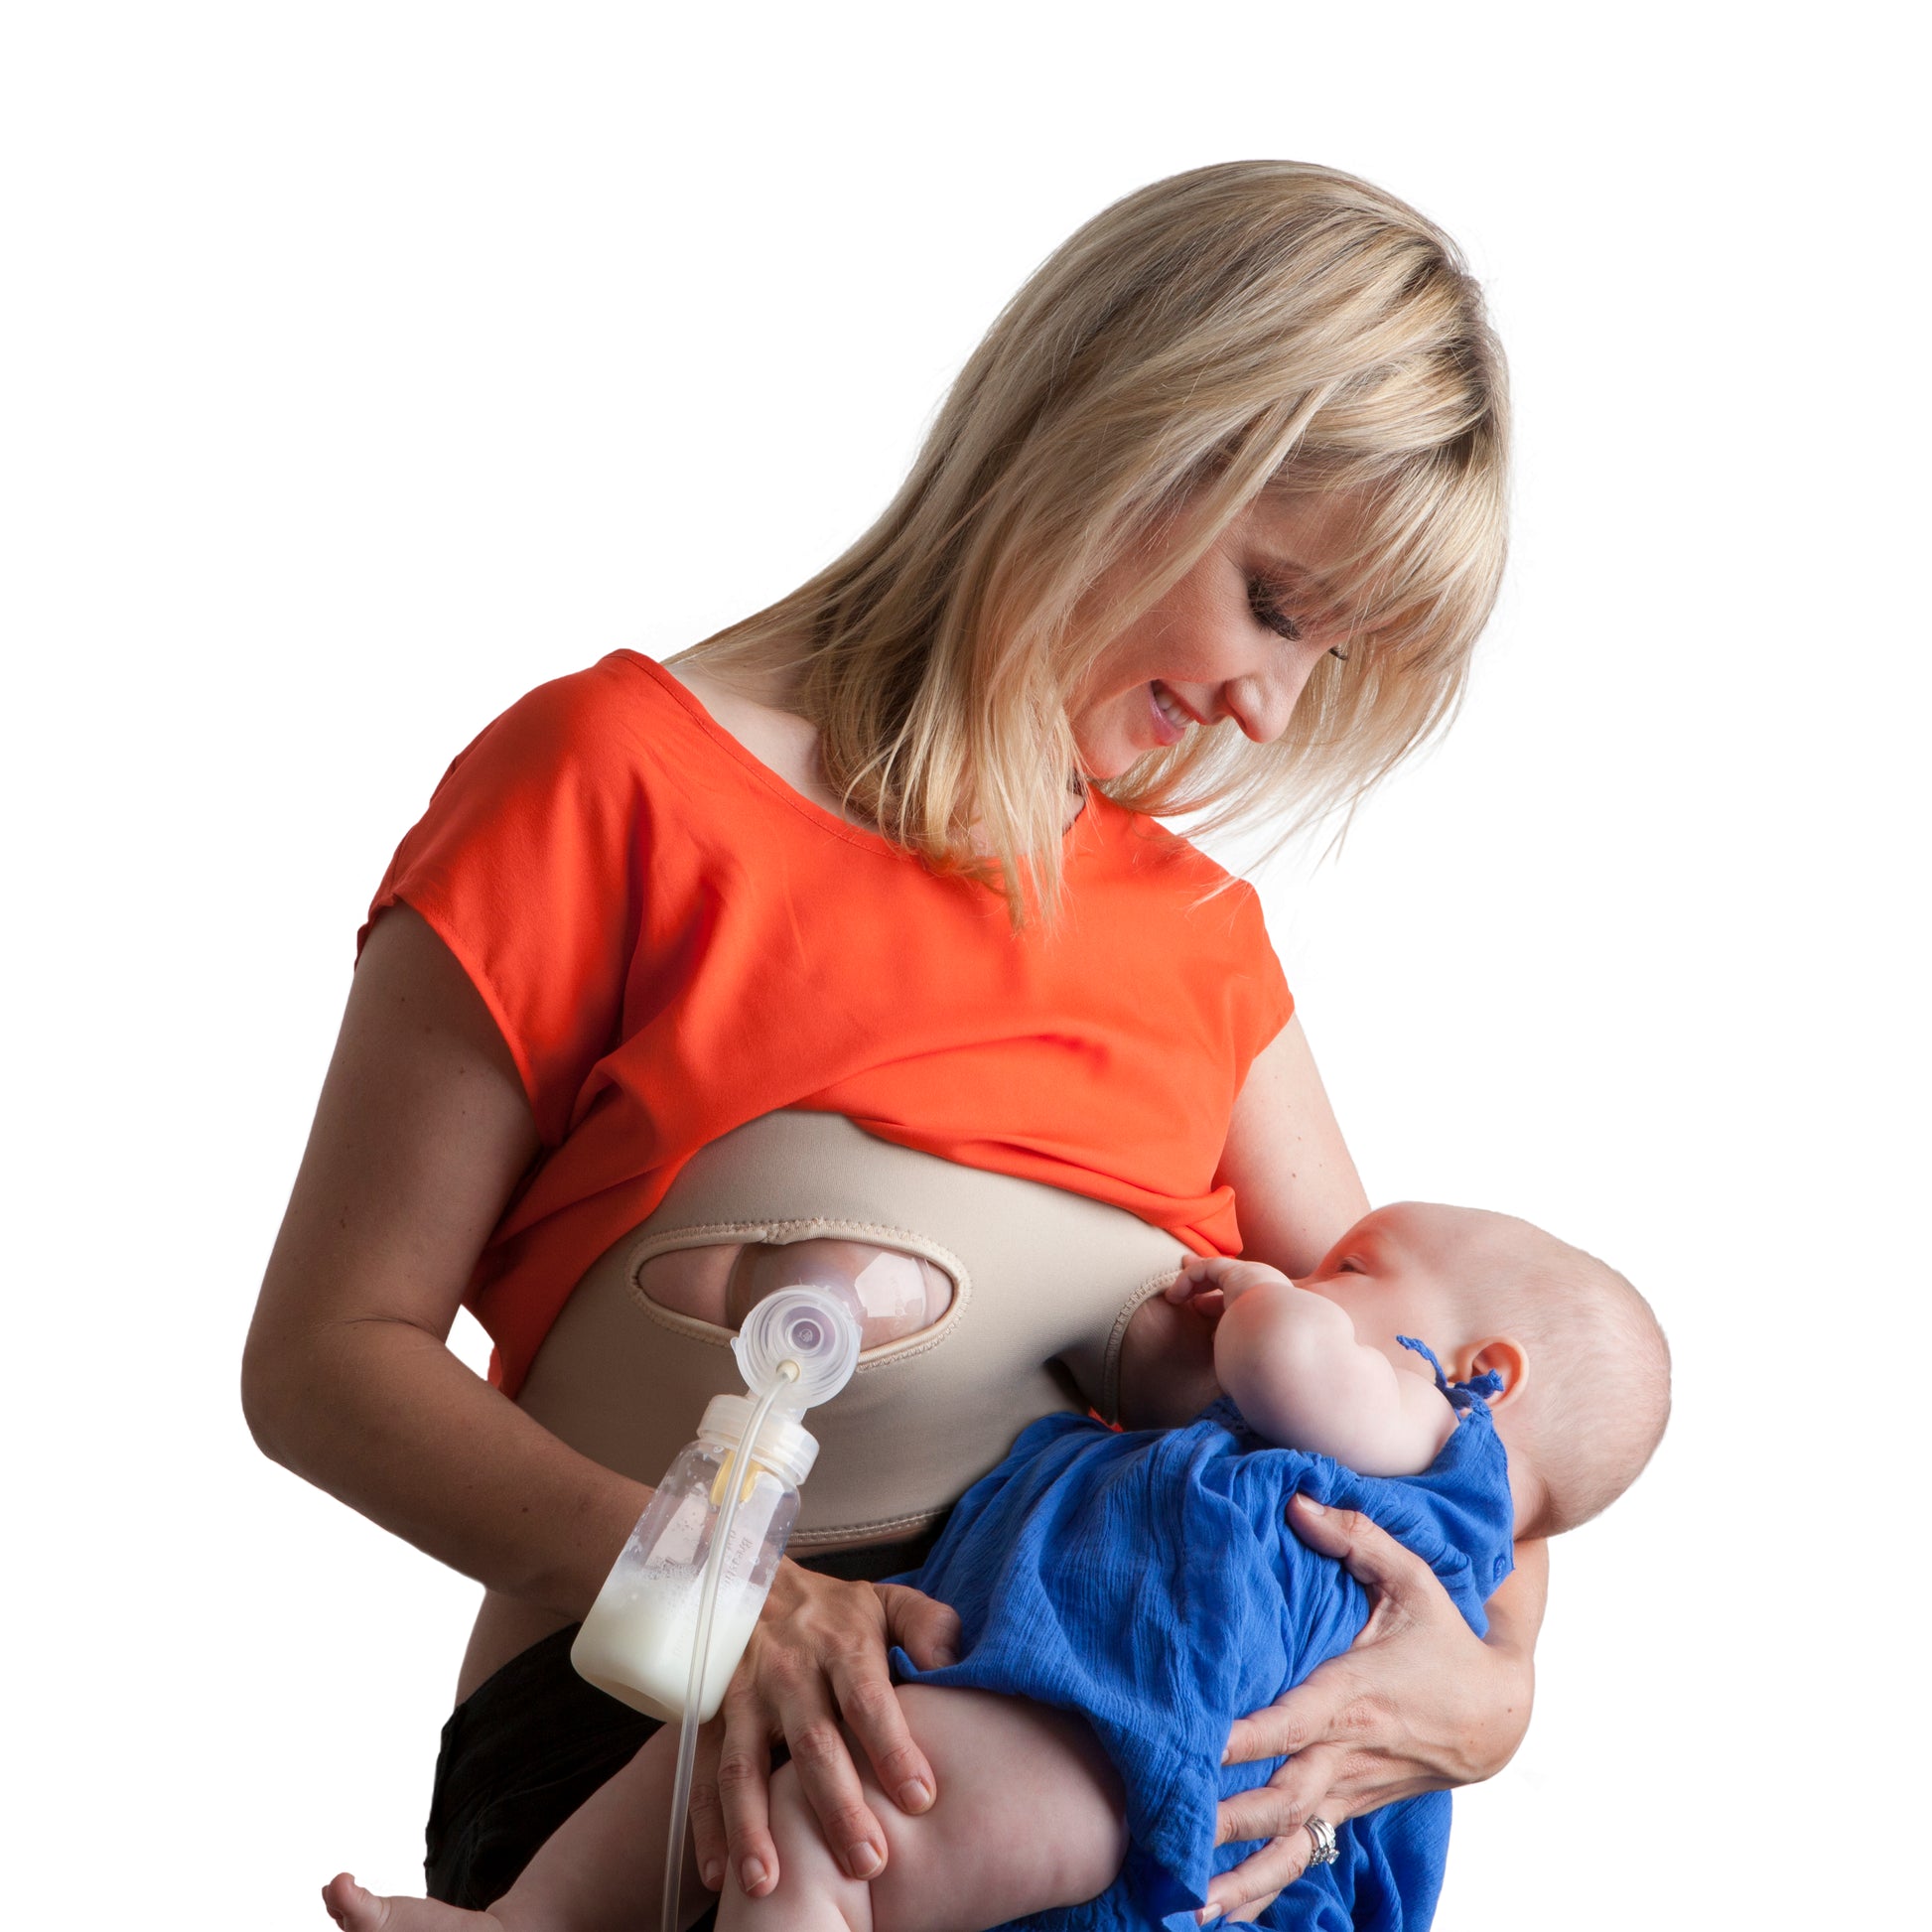 Difference Between a Hands Free Pumping and Nursing Bra - The Pumping Mommy